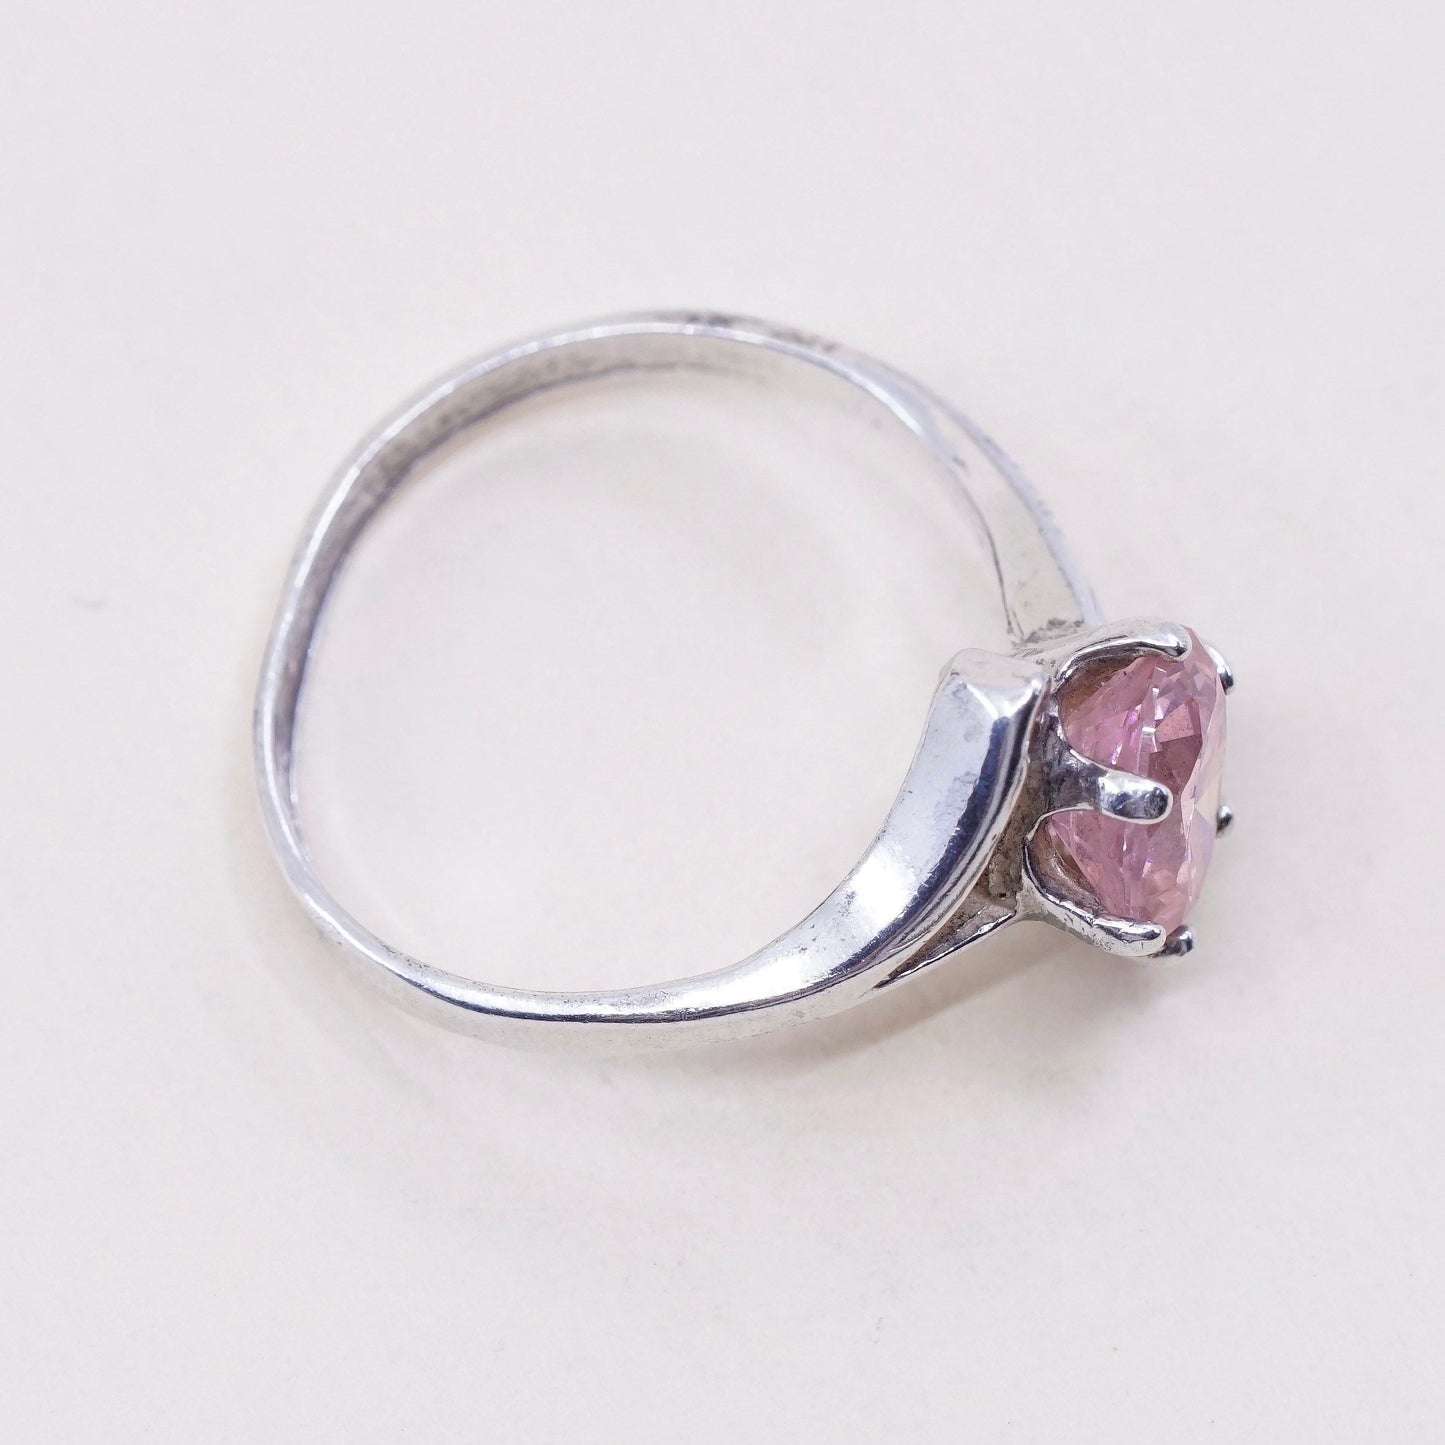 Size 7.5, vintage sterling 925 silver handmade ring with pink crystal